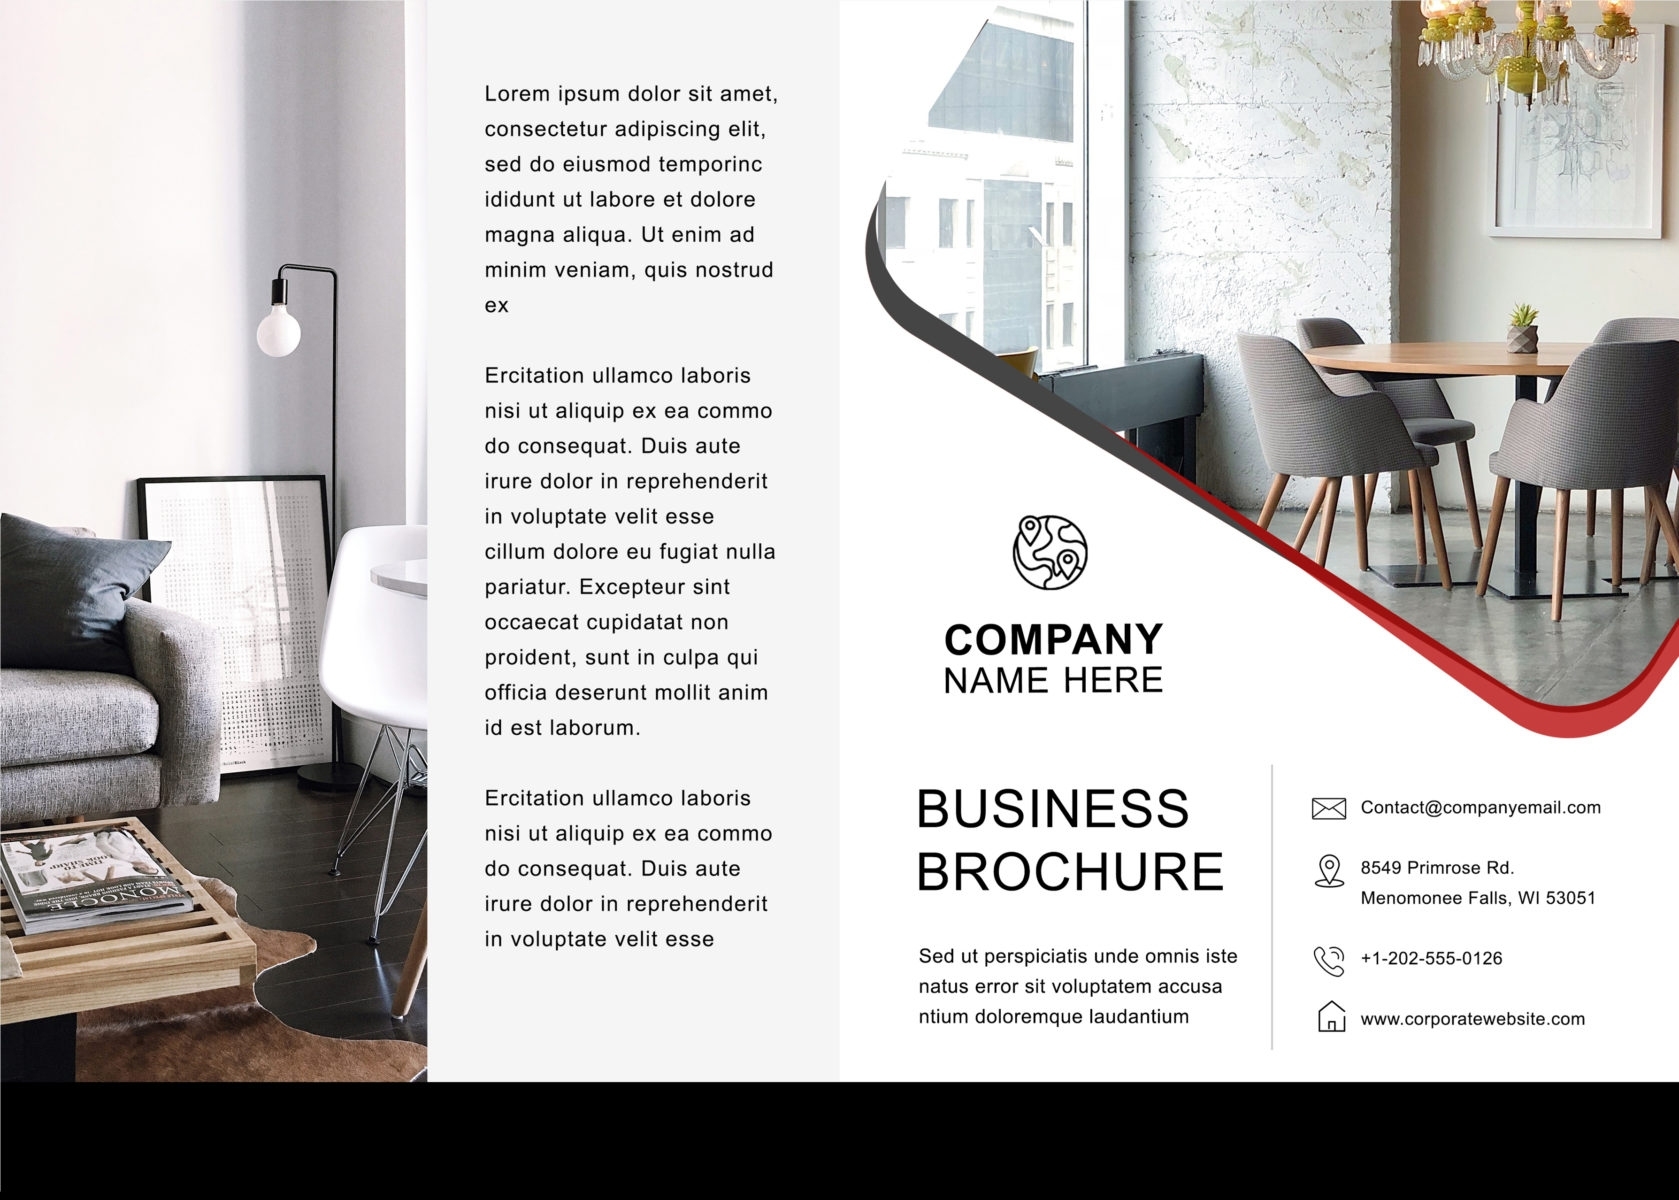 11X17 Brochure Template Word For Your Needs Within 11X17 Brochure Template